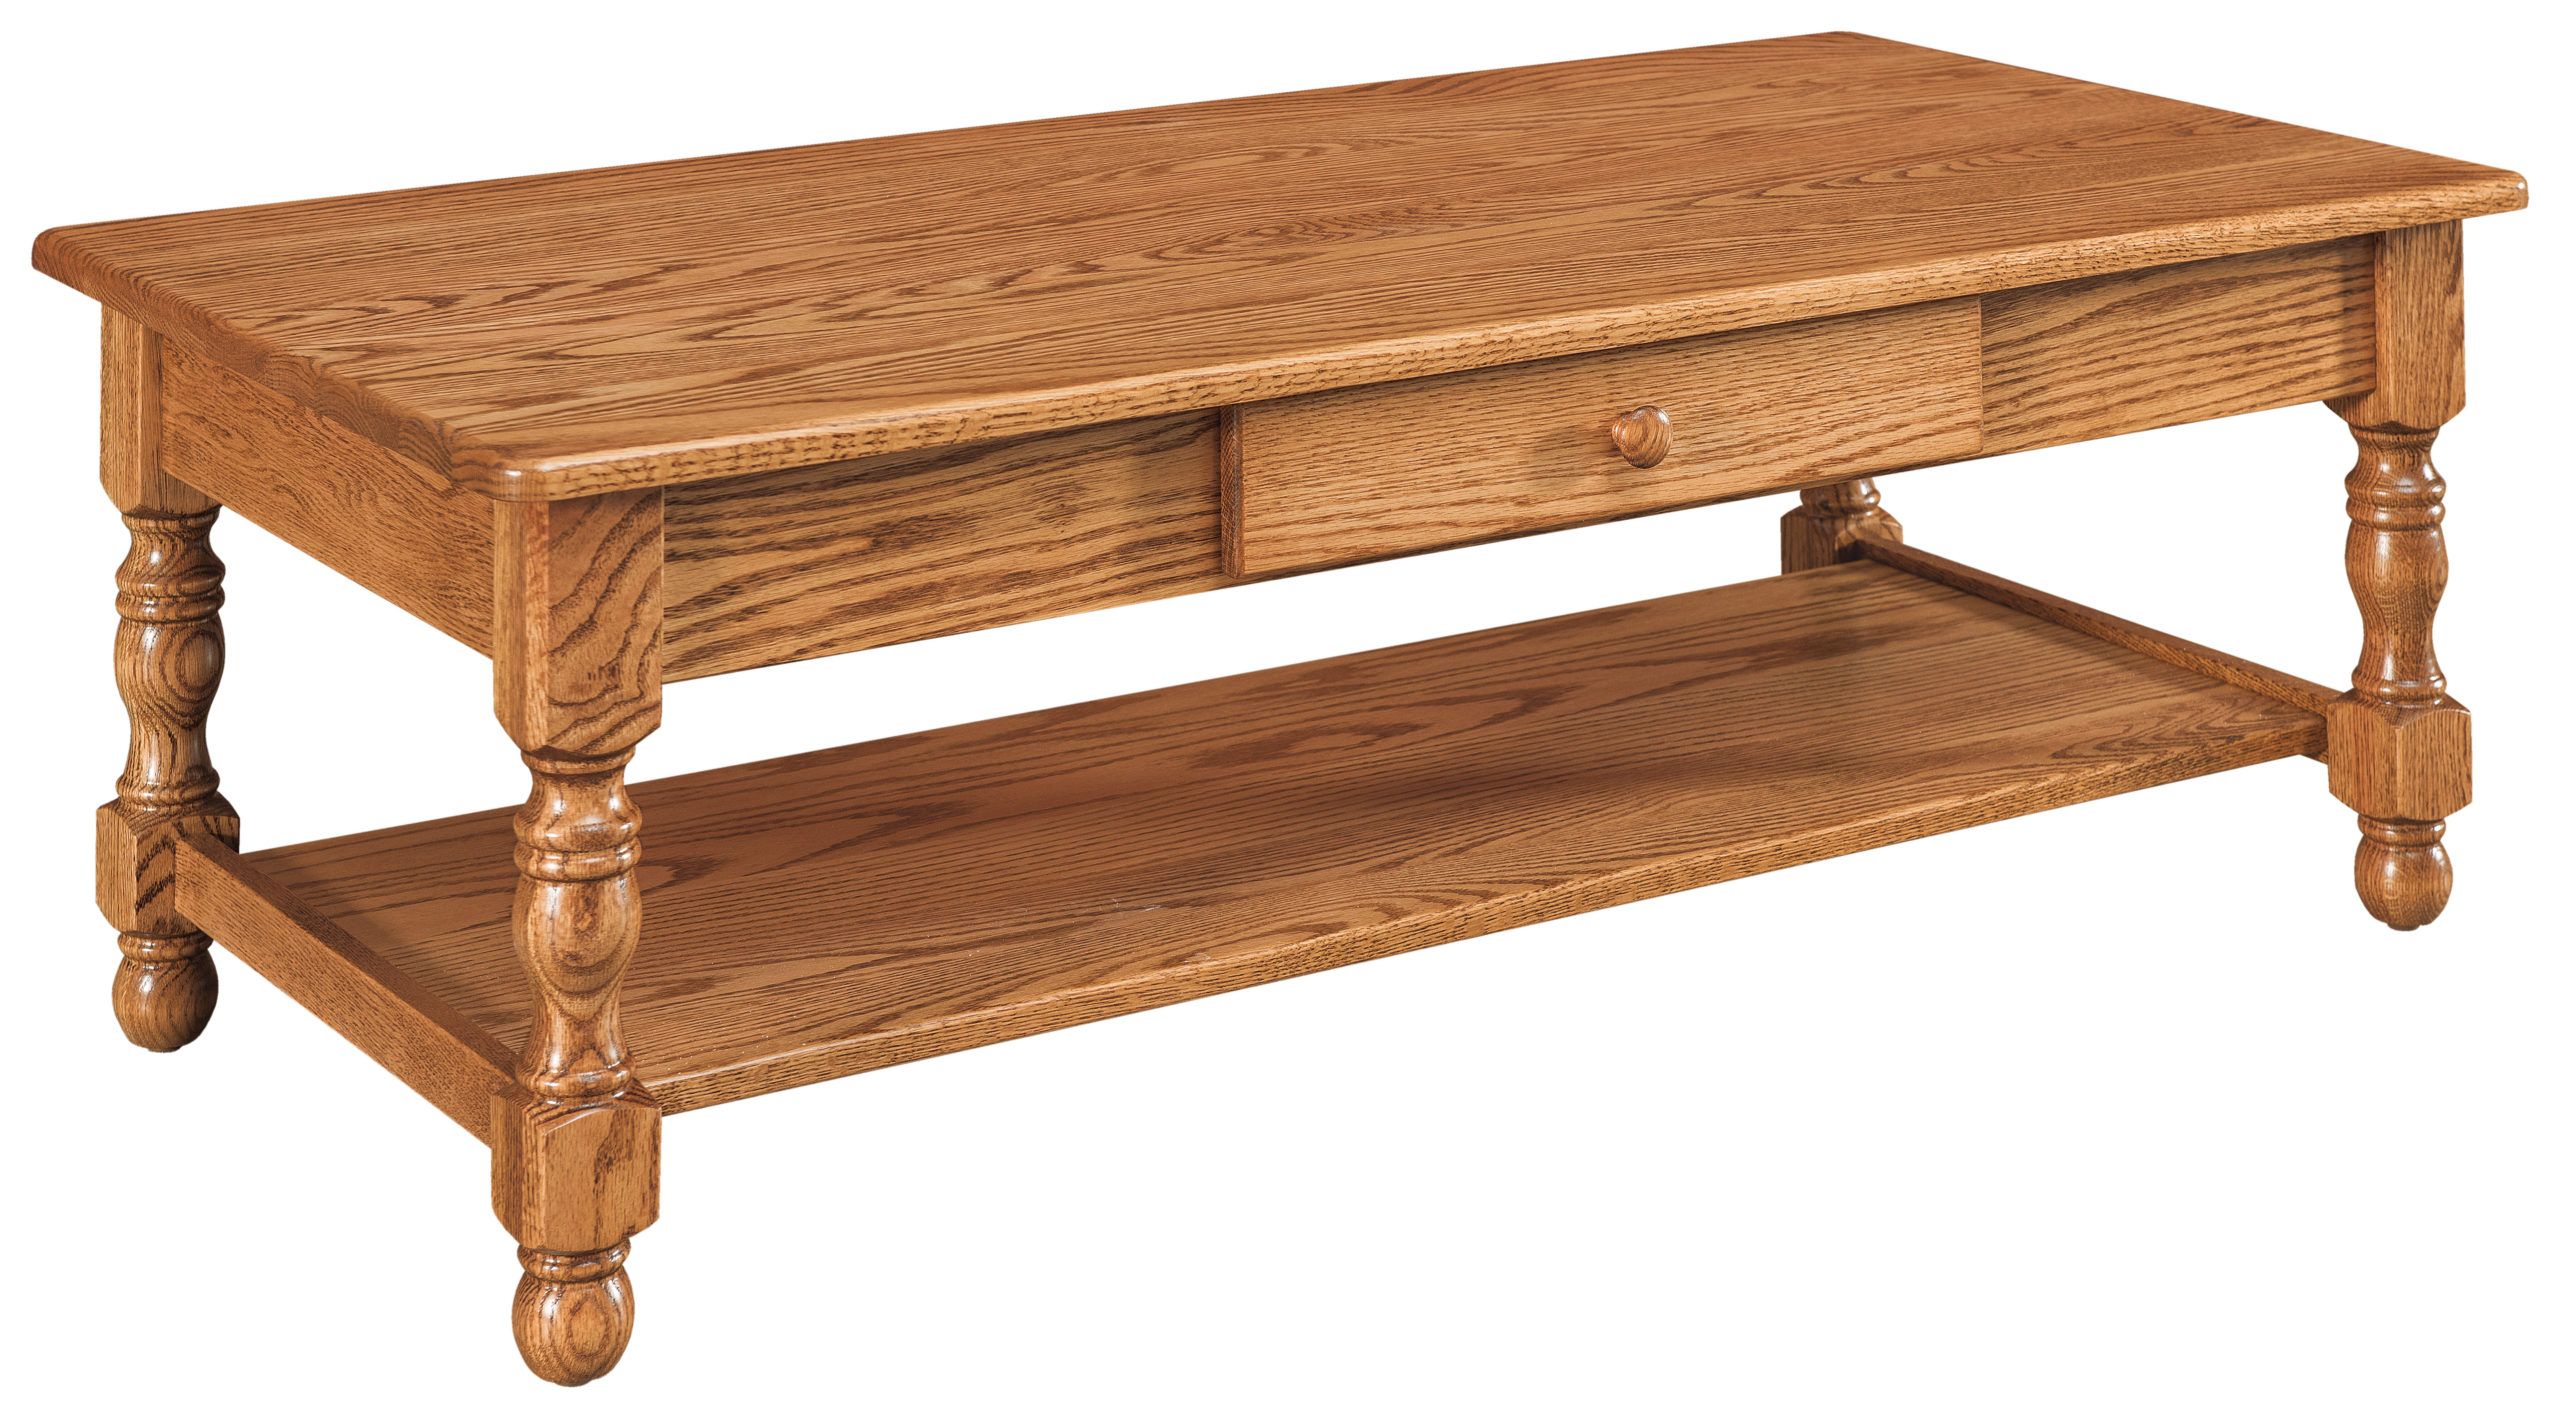 Country Coffee Table | Amish Solid Wood Coffee Tables | Kvadro Furniture For Coffee Tables With Solid Legs (View 20 of 20)